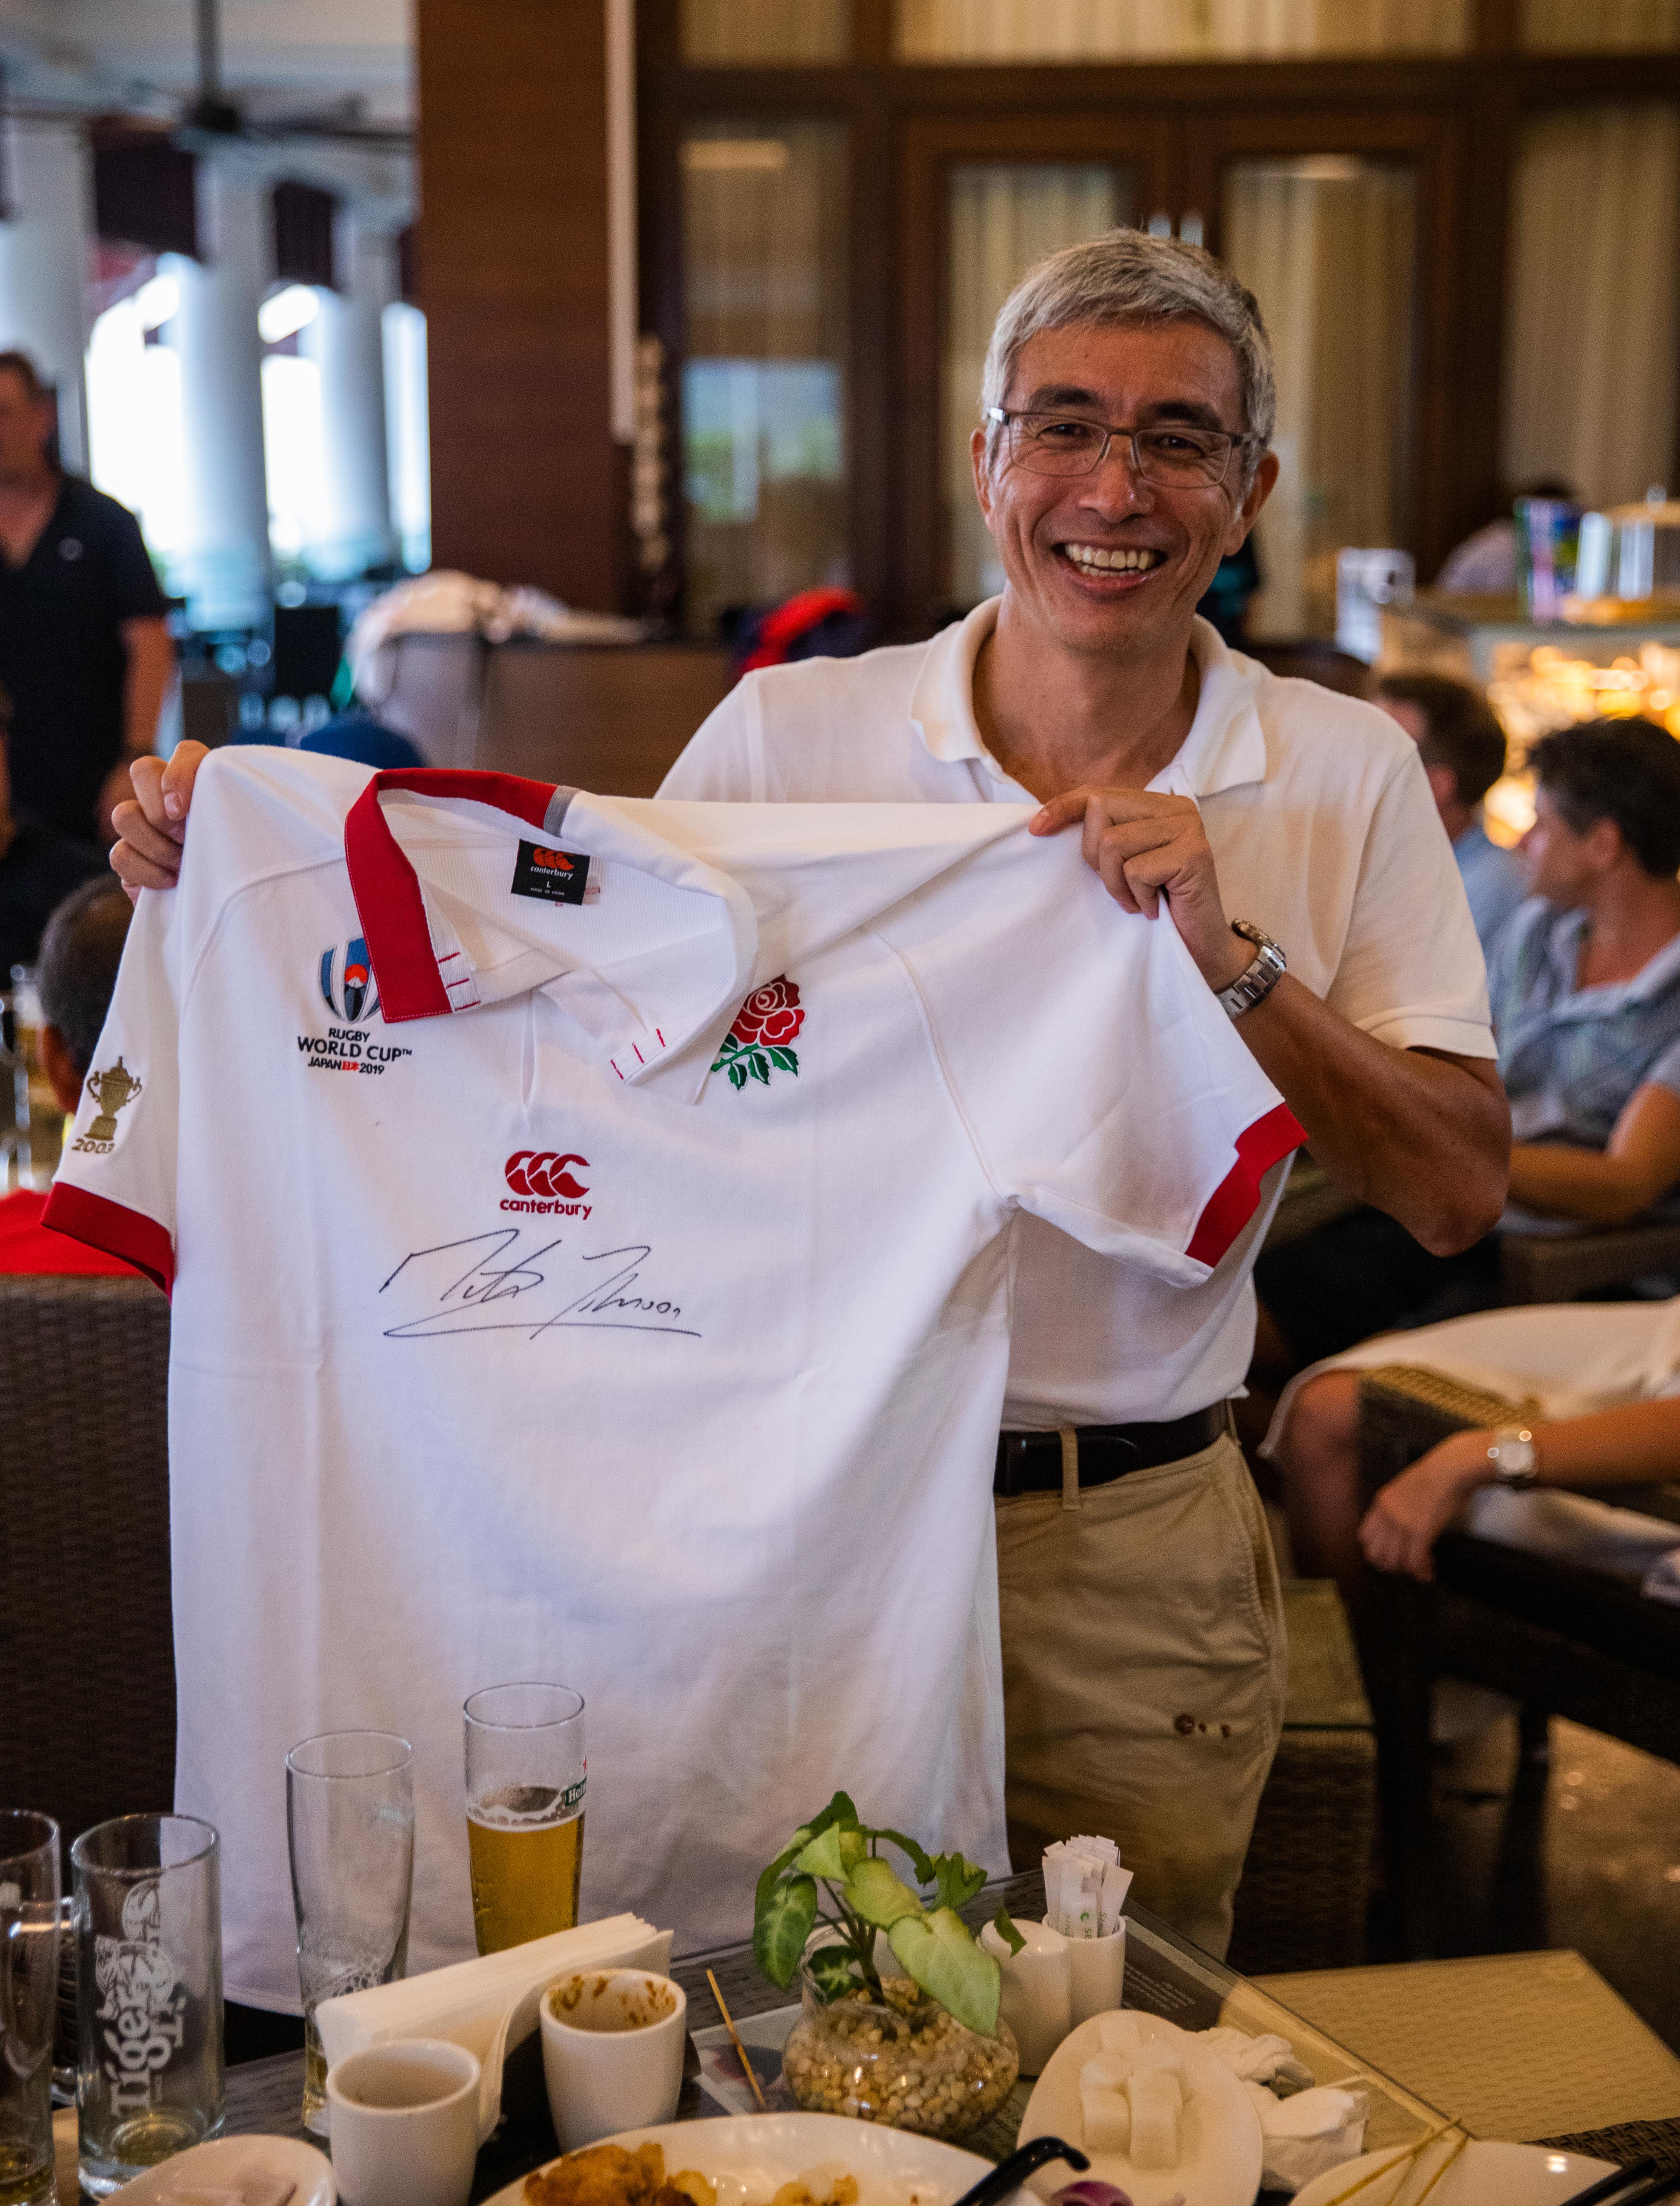 man showing signed rugby shirt